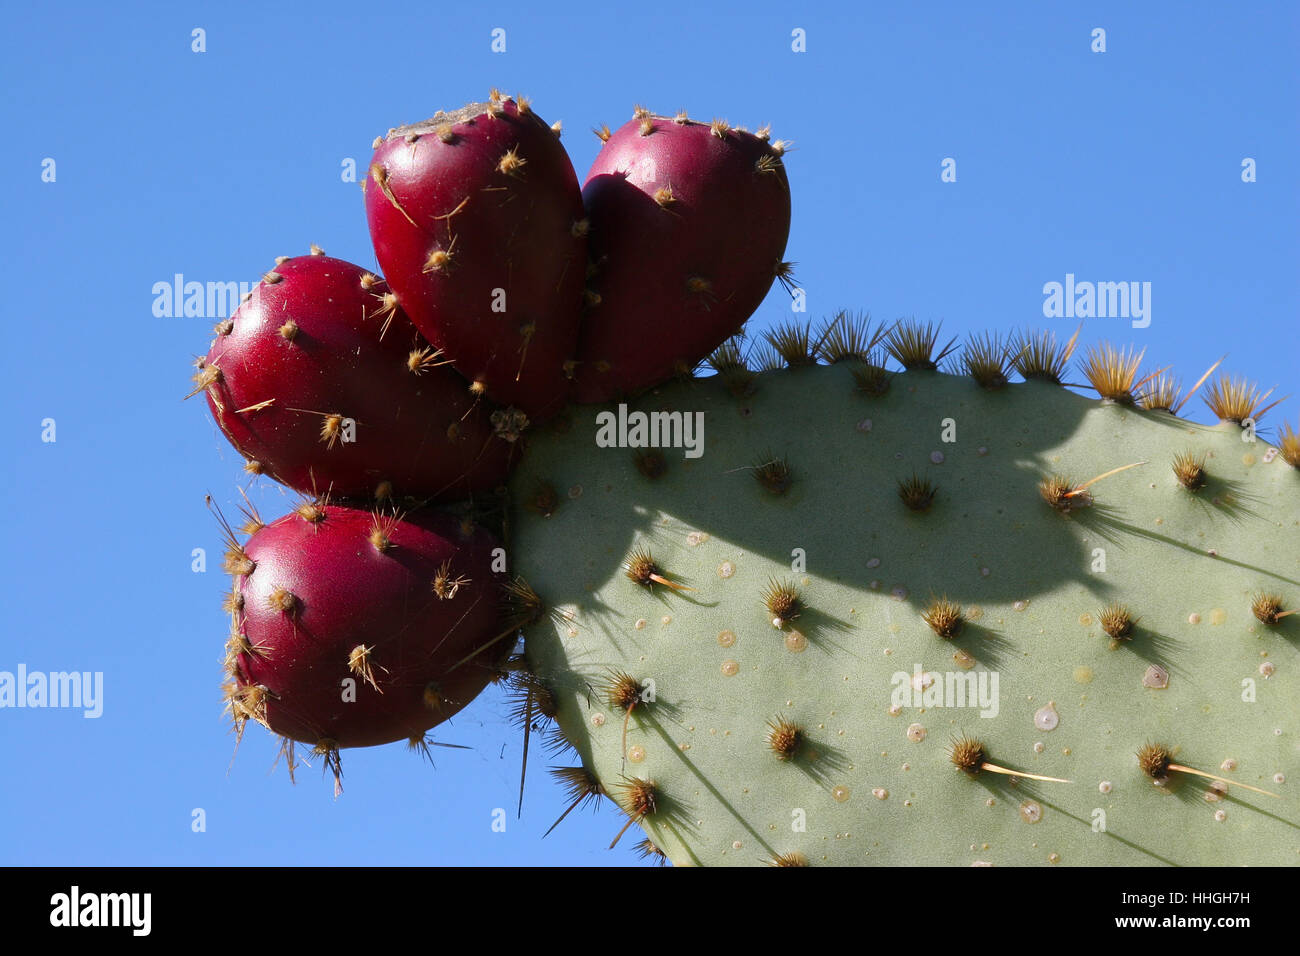 Prickly pear - Opuntia ficus - fruits Stock Photo